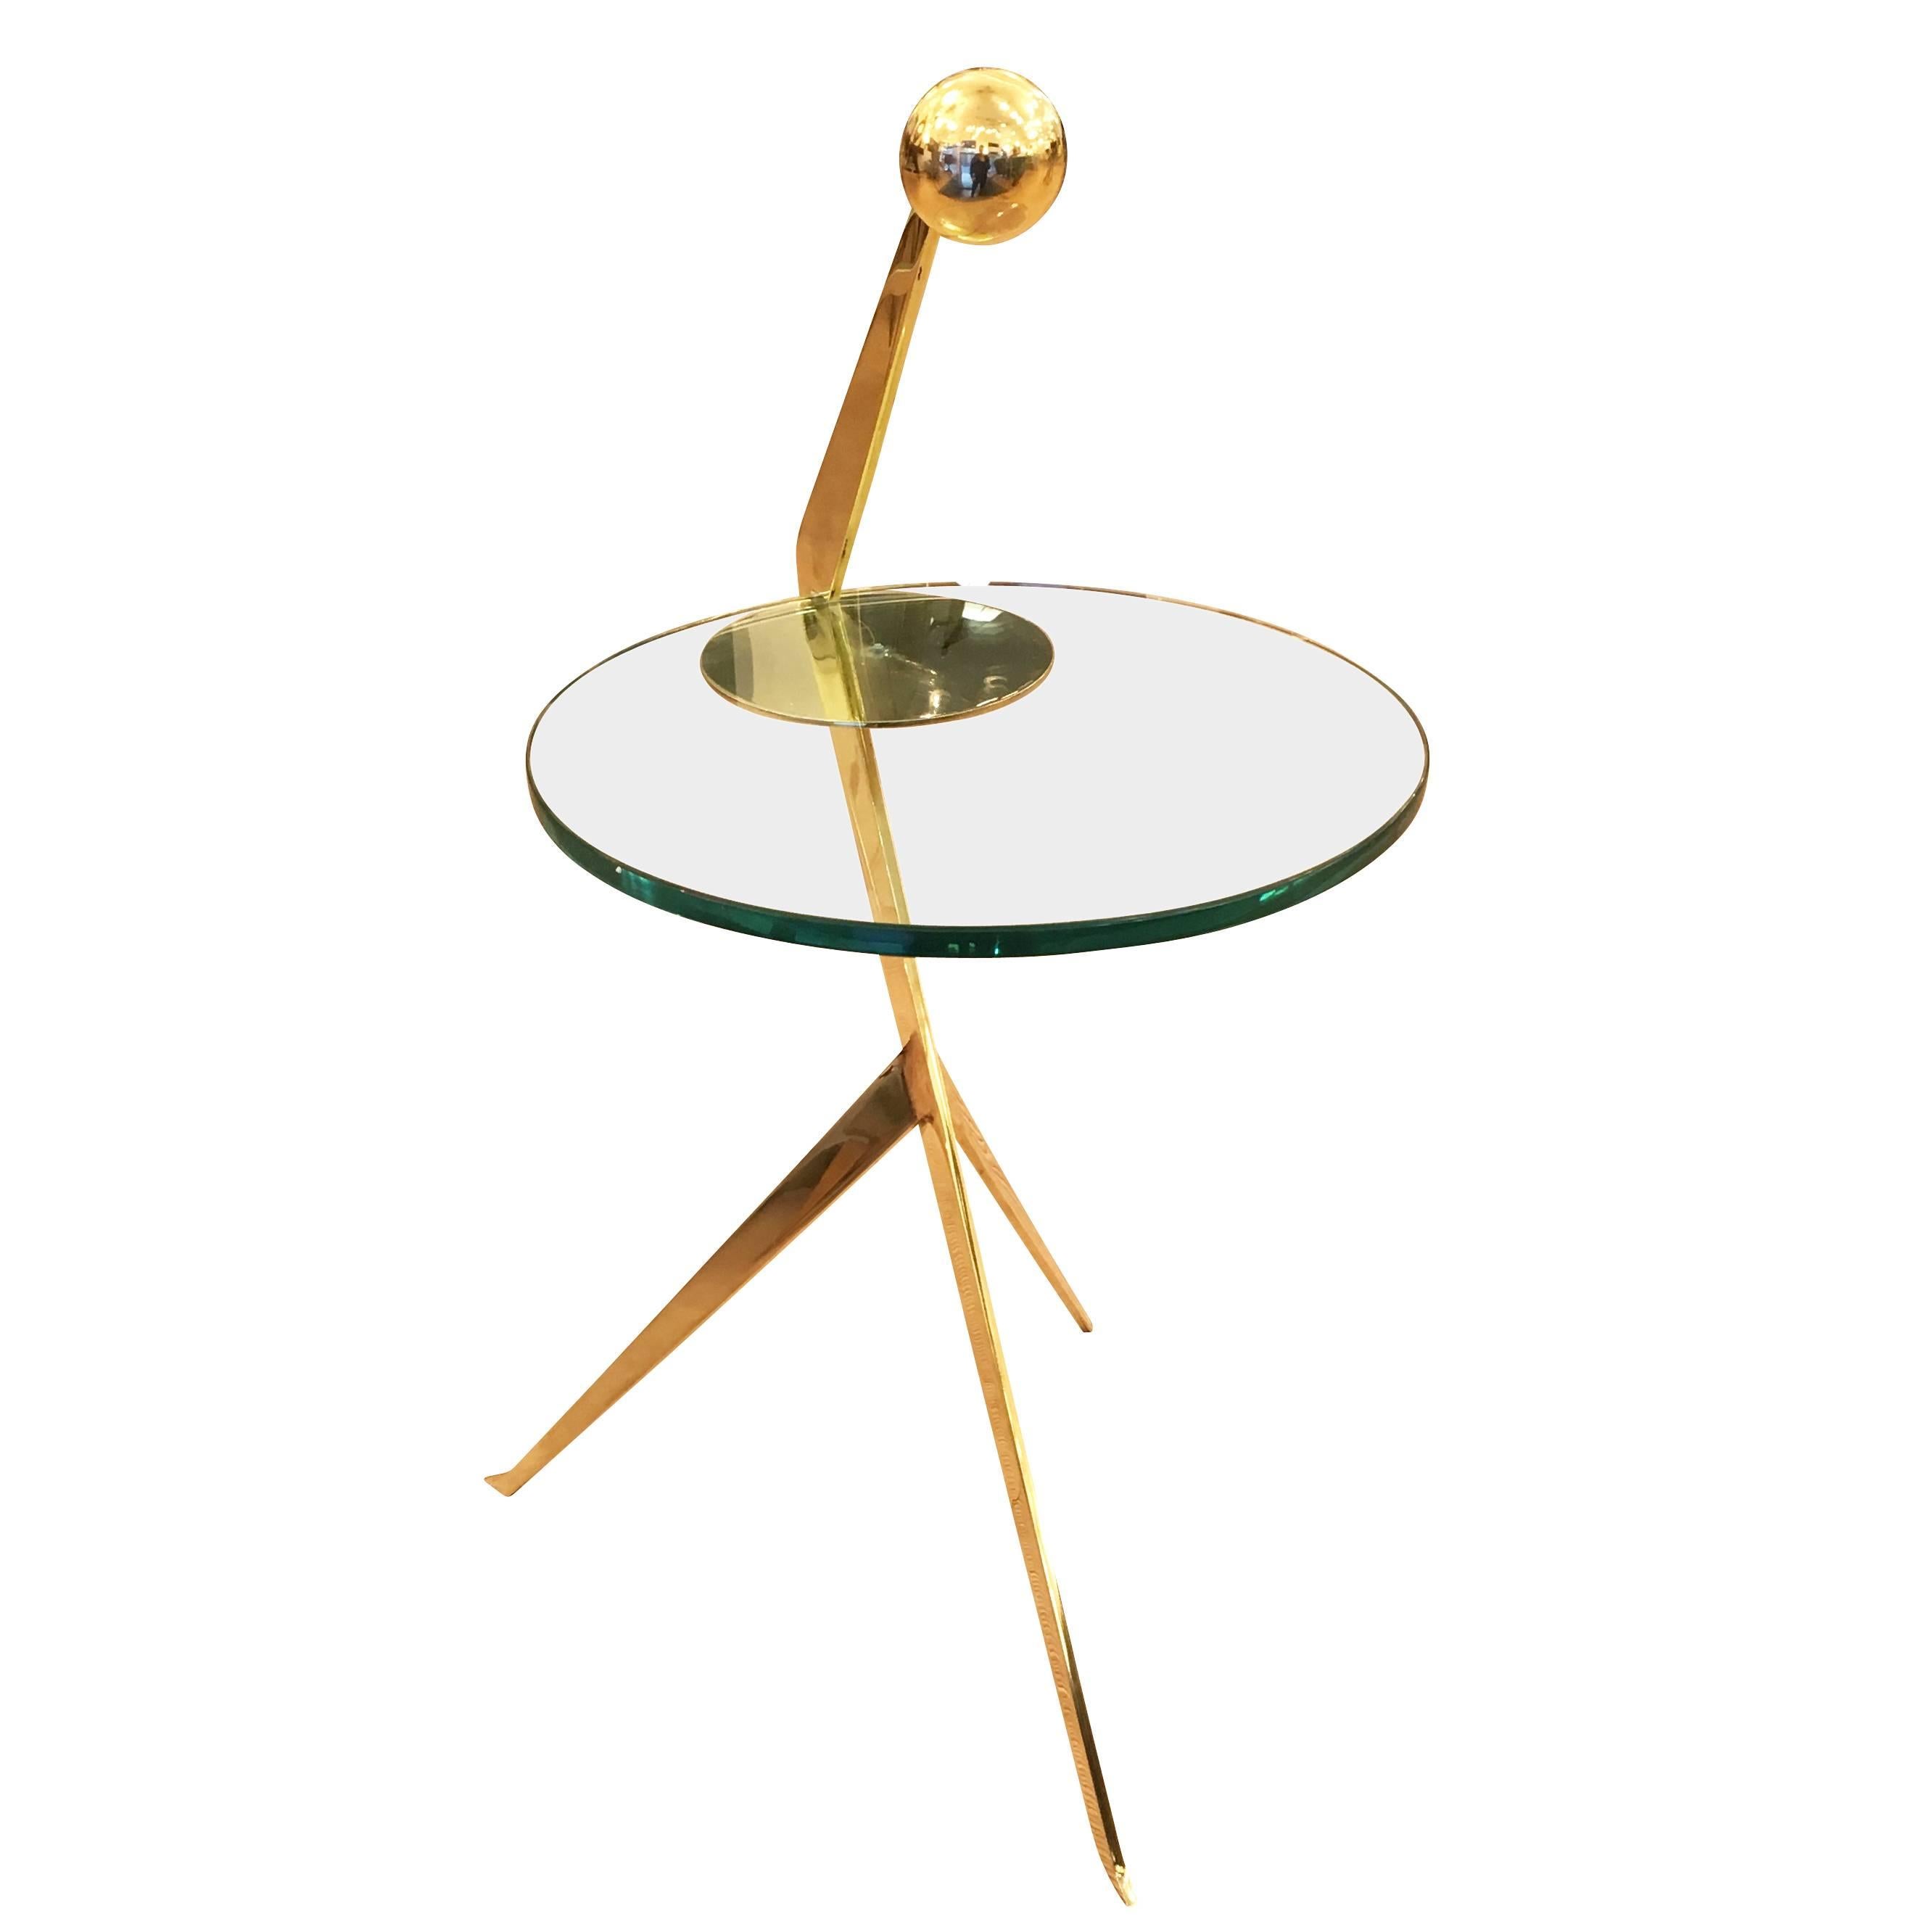 Cantilever side table designed by Gaspare Asaro for formA featuring a thick glass top on a polished brass frame. The brass spherical handle makes it is easy to move around. Finish can be customized.

Measures: Width 14